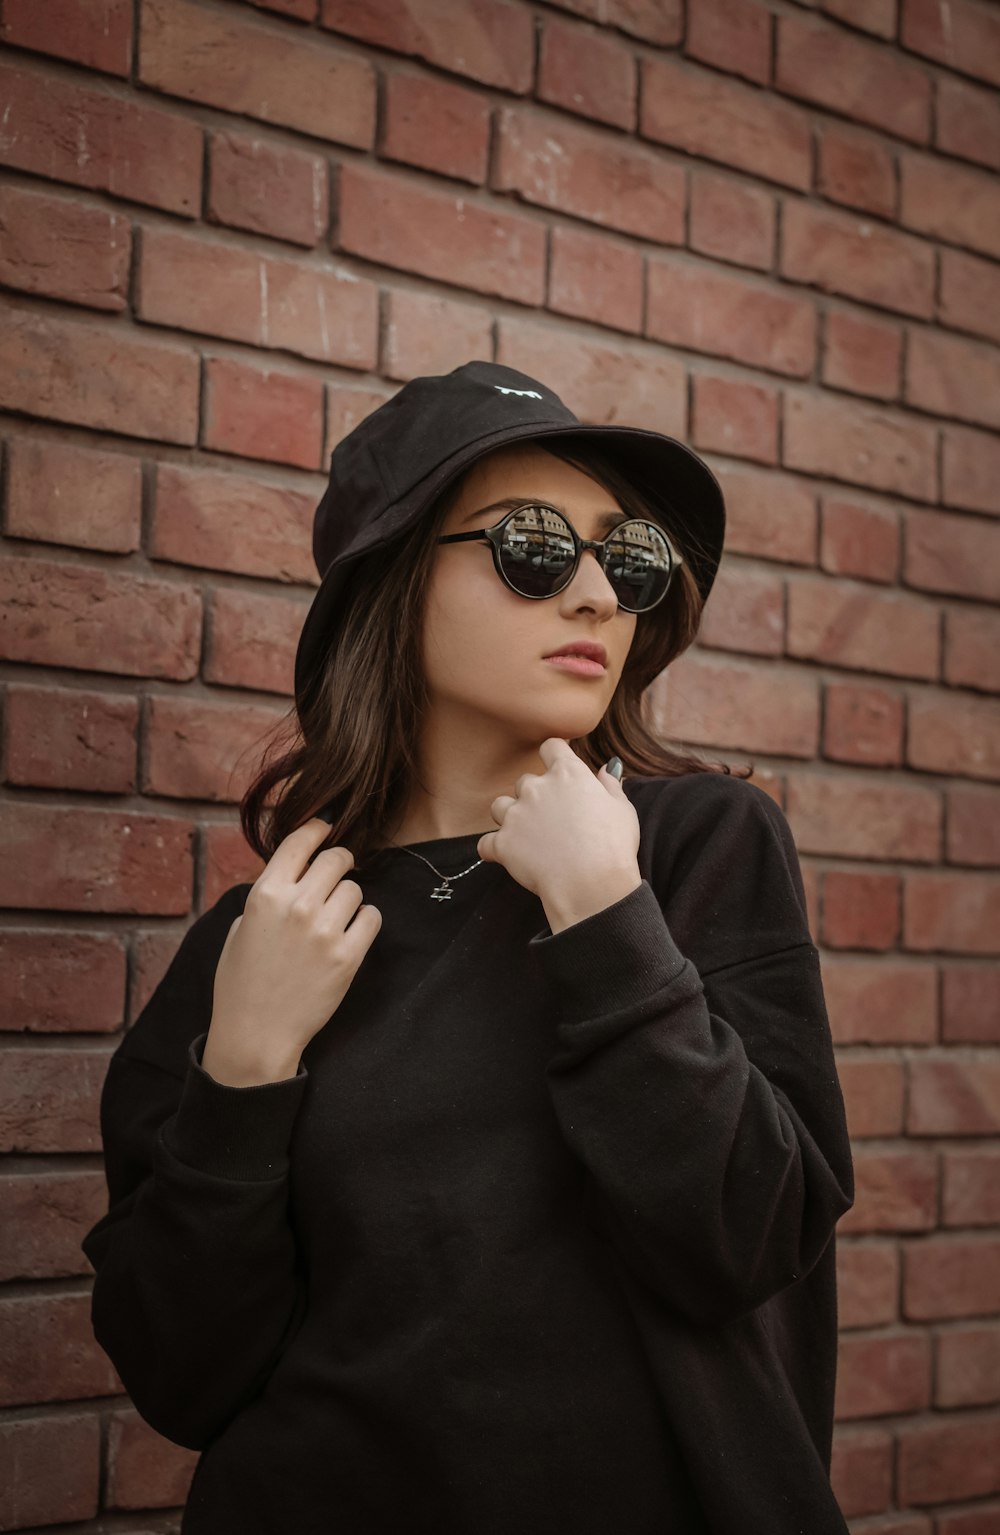 a woman wearing a hat and sunglasses standing in front of a brick wall